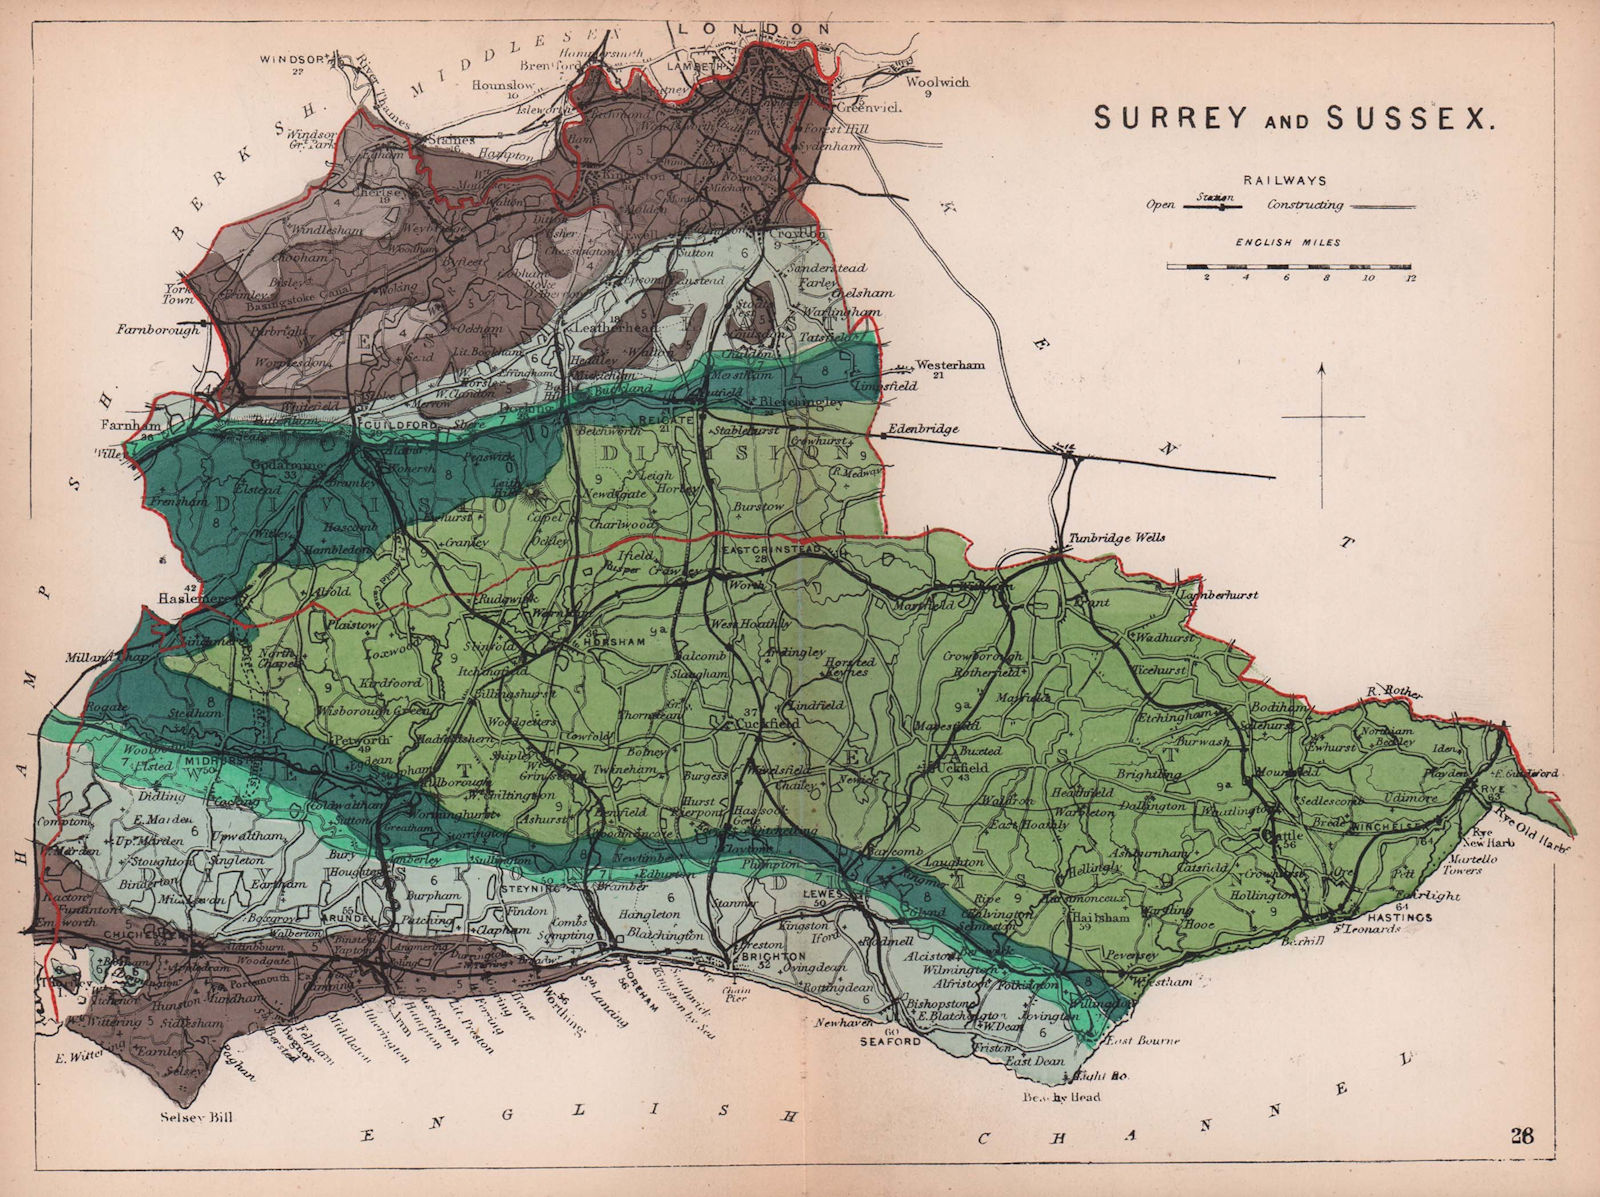 SURREY & SUSSEX antique geological county map by James Reynolds 1864